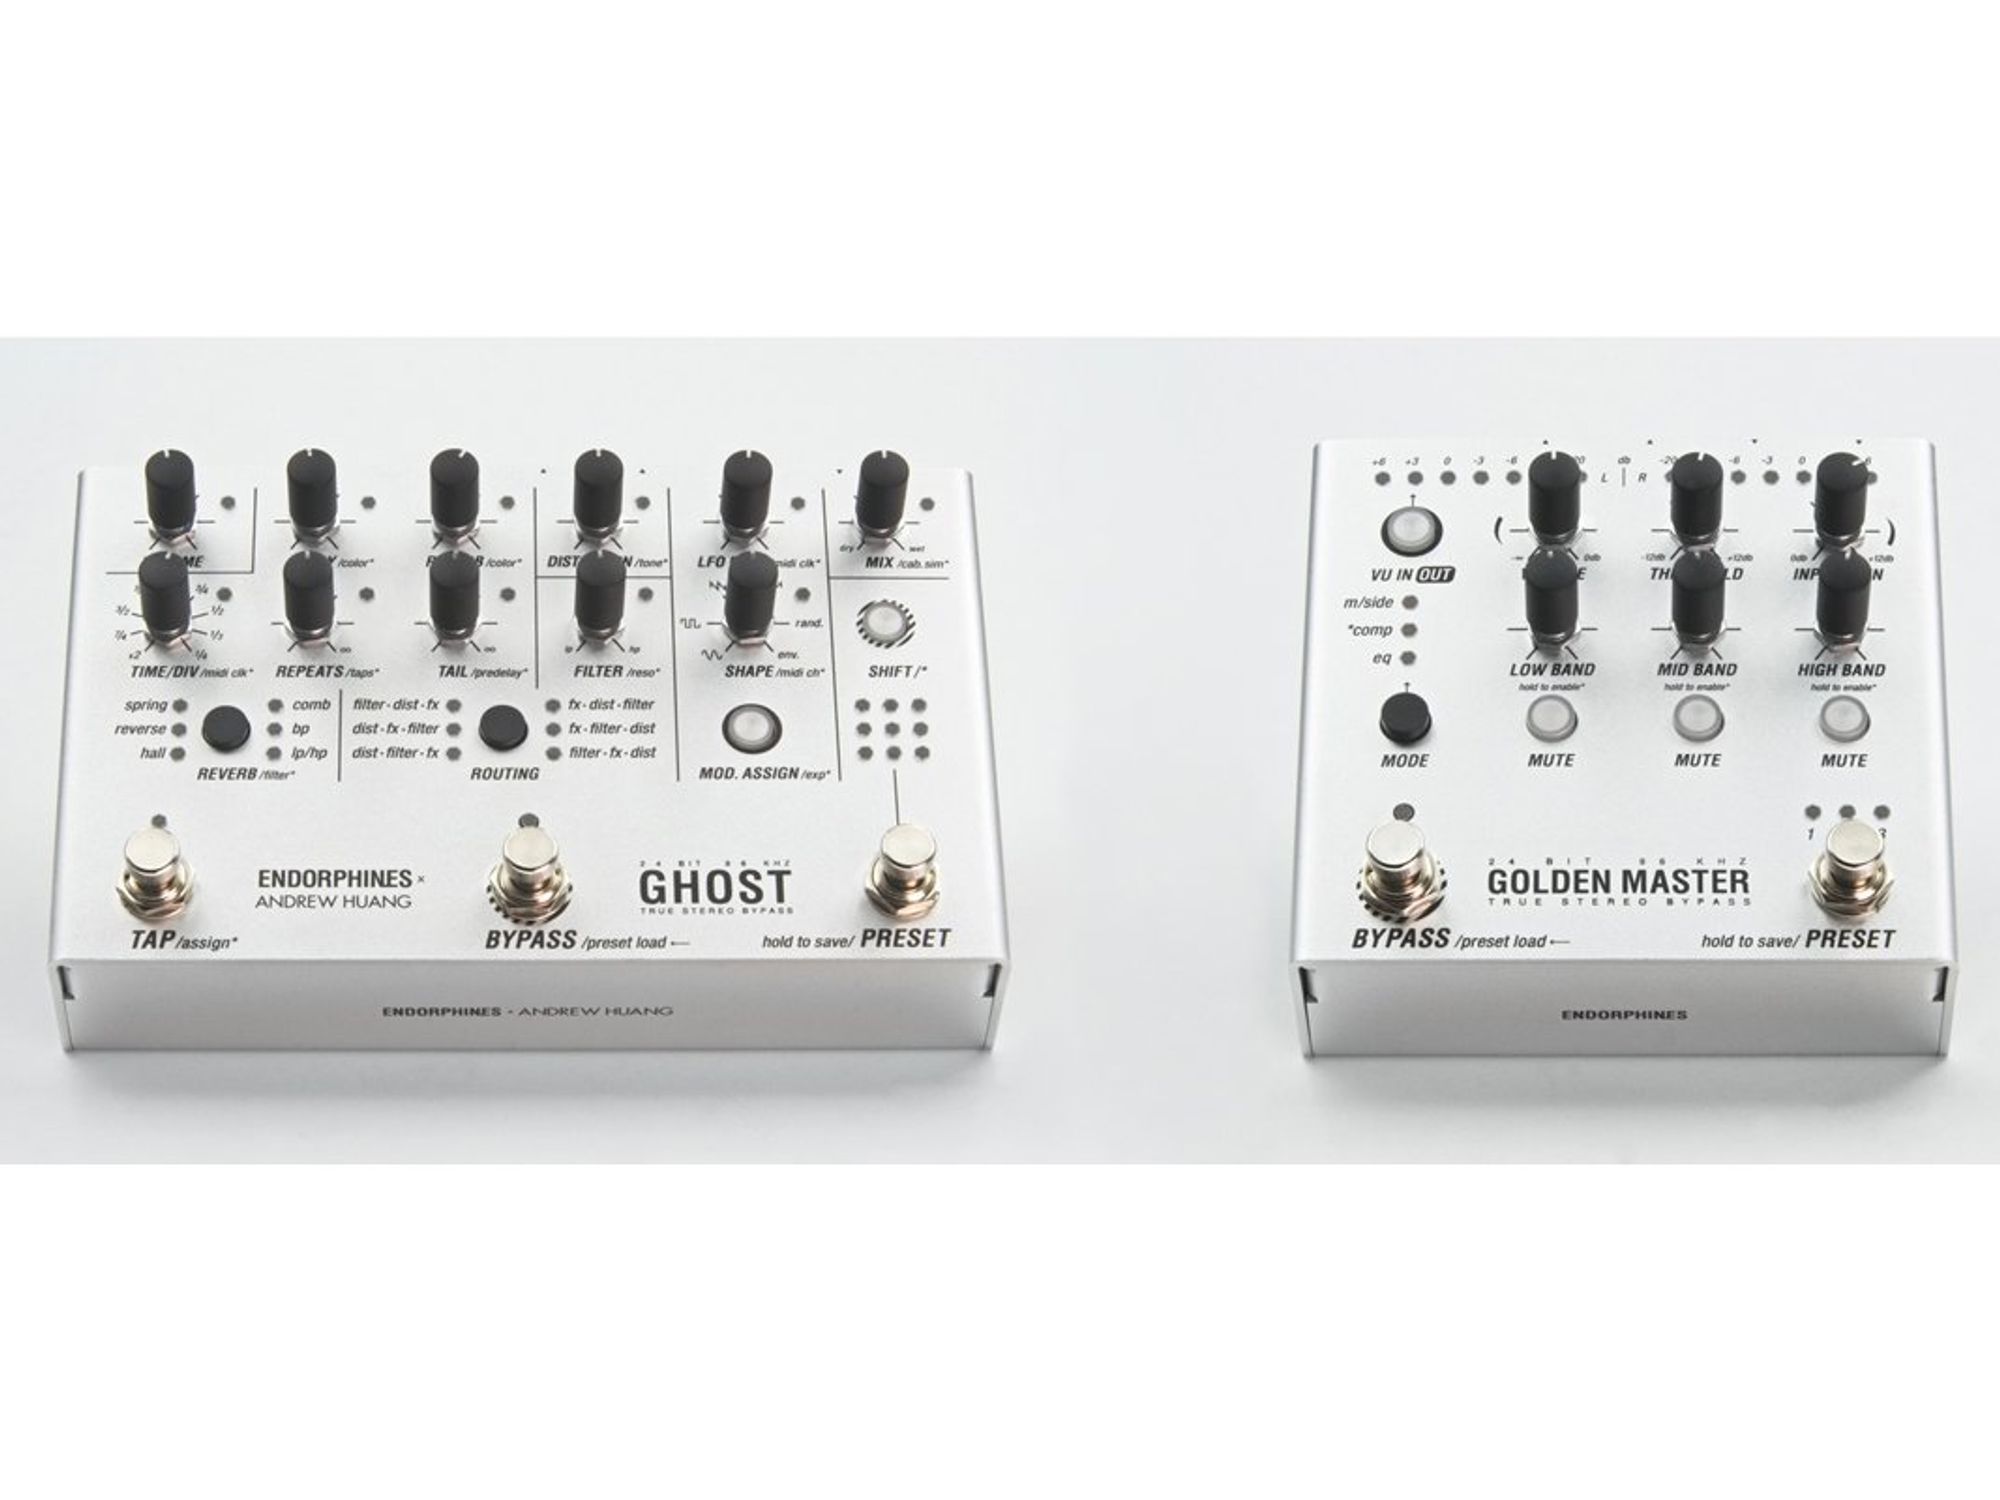 Endorphines Releases the Ghost Pedal and Golden Master